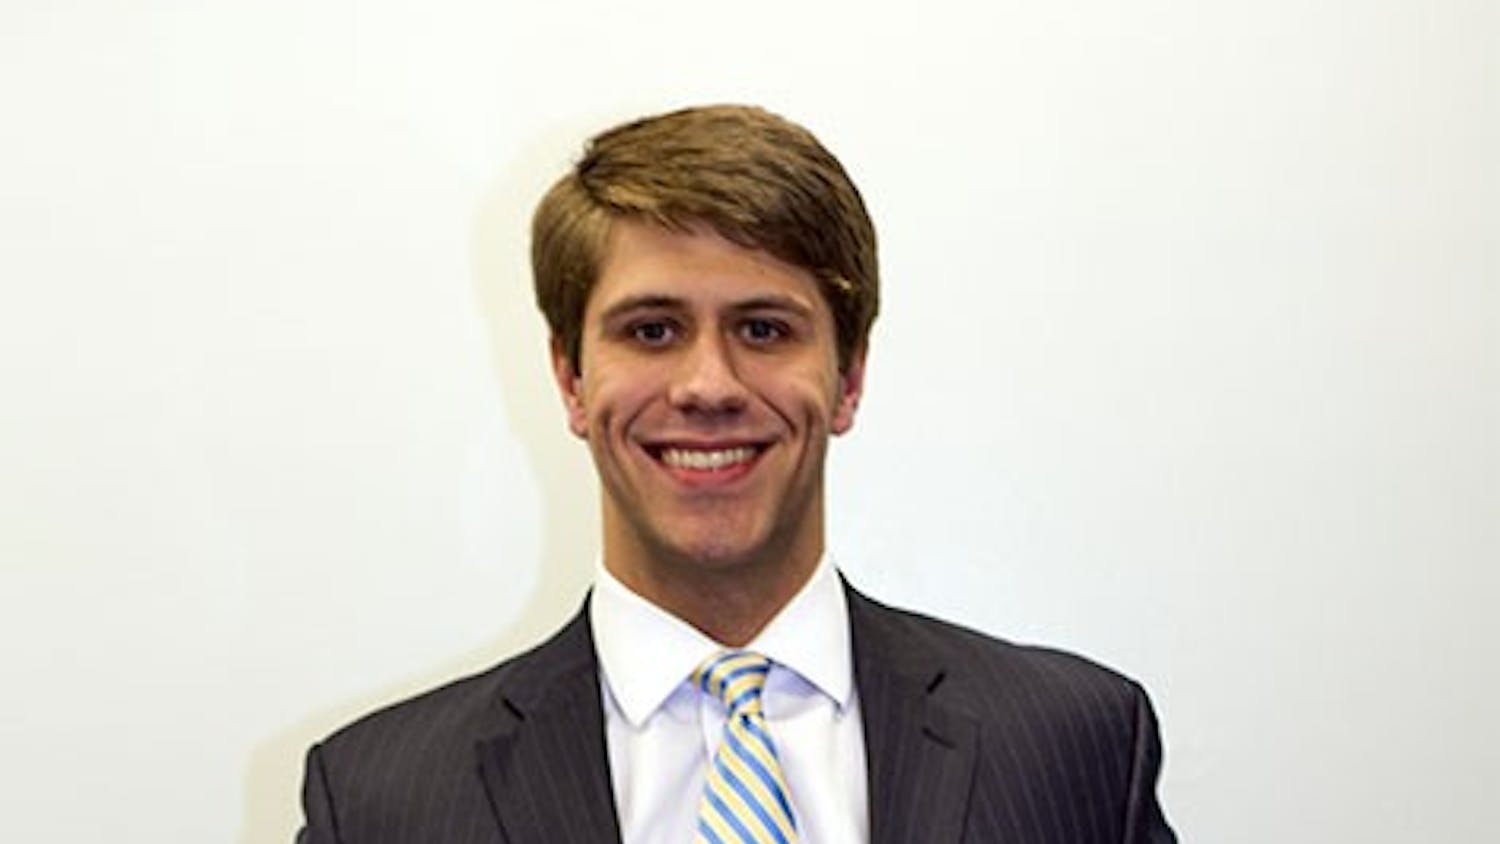 Michael Parks, third-year finance student and student body presidential candidate